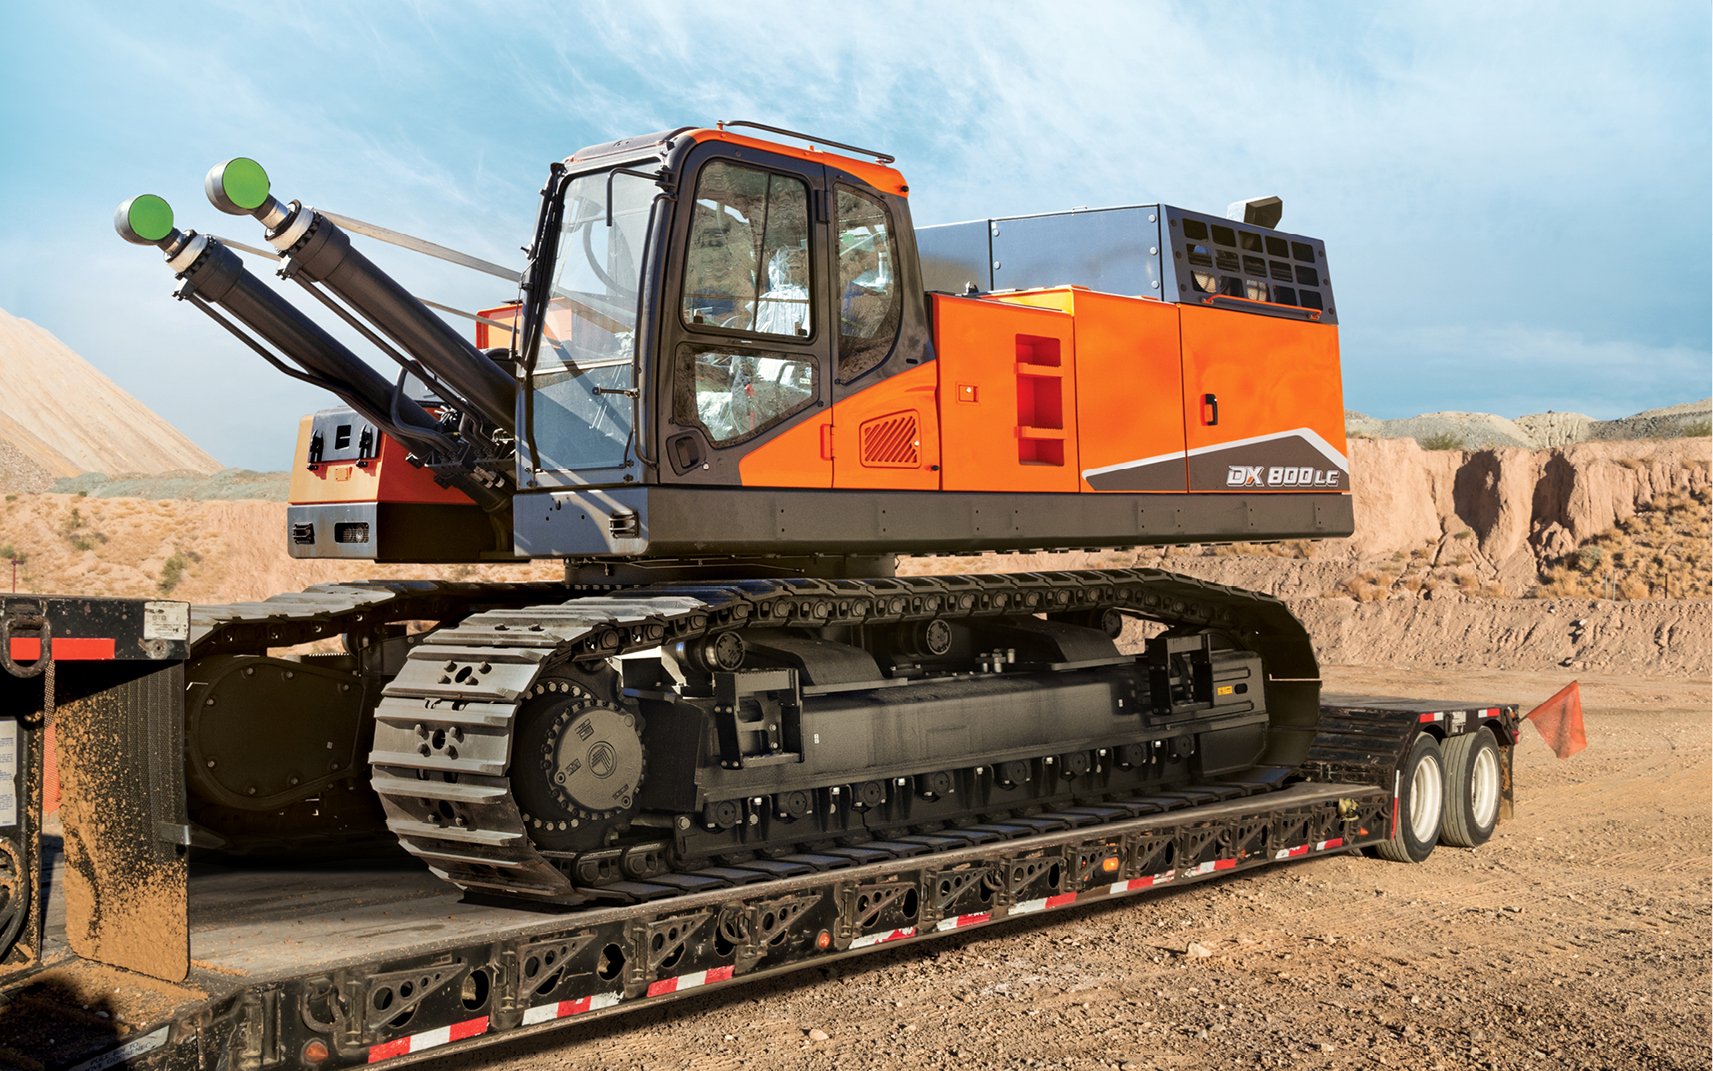 A DEVELON crawler excavator is loaded up for transport to the next job site.